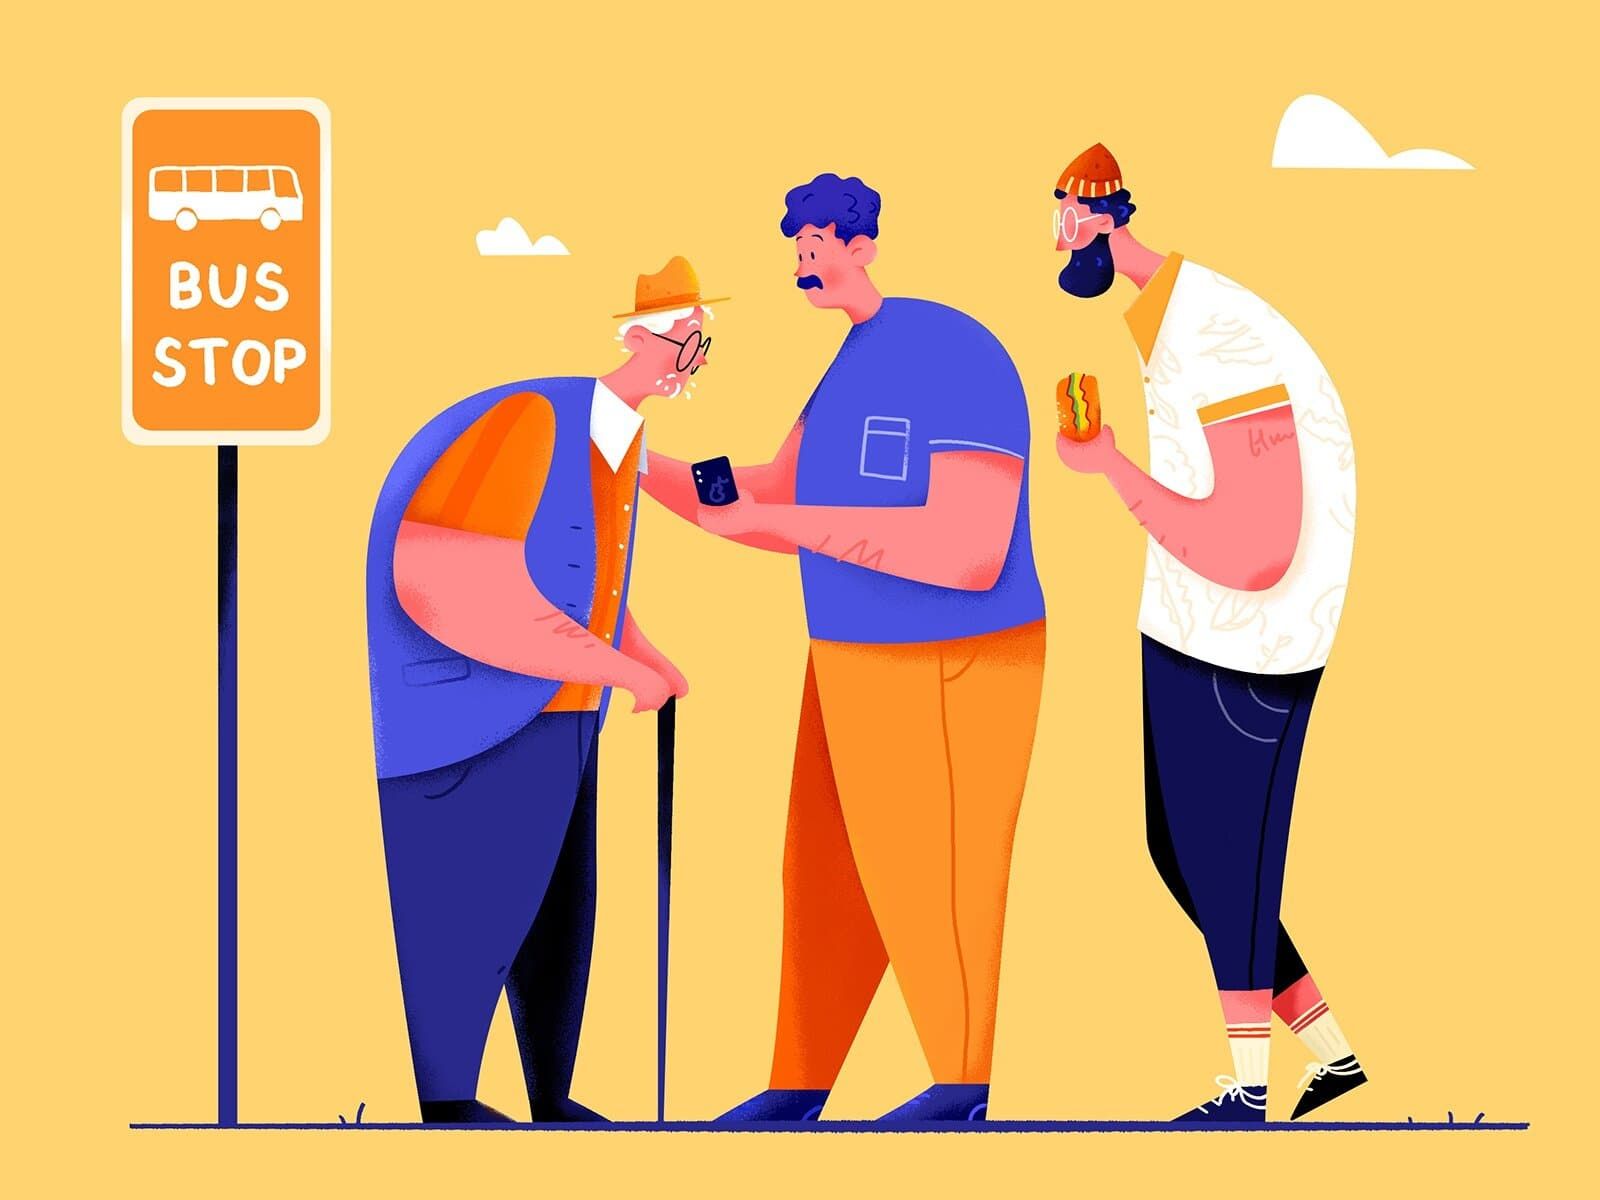 The target audience for selling crutches in an online shopping experience (*image by [Uran](https://dribbble.com/urancd){ rel="nofollow" target="_blank" .default-md}*)